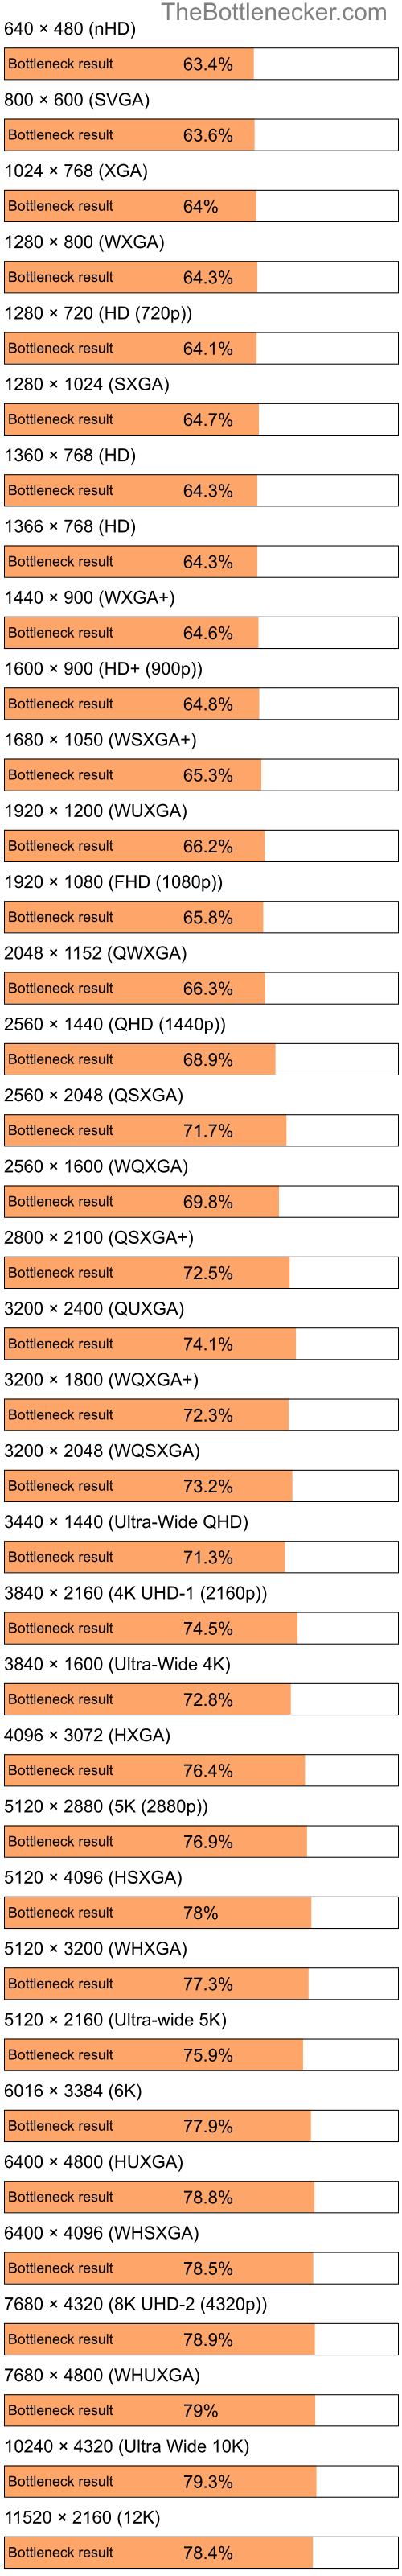 Bottleneck results by resolution for Intel Atom N270 and AMD Mobility Radeon X1700 in7 Days to Die